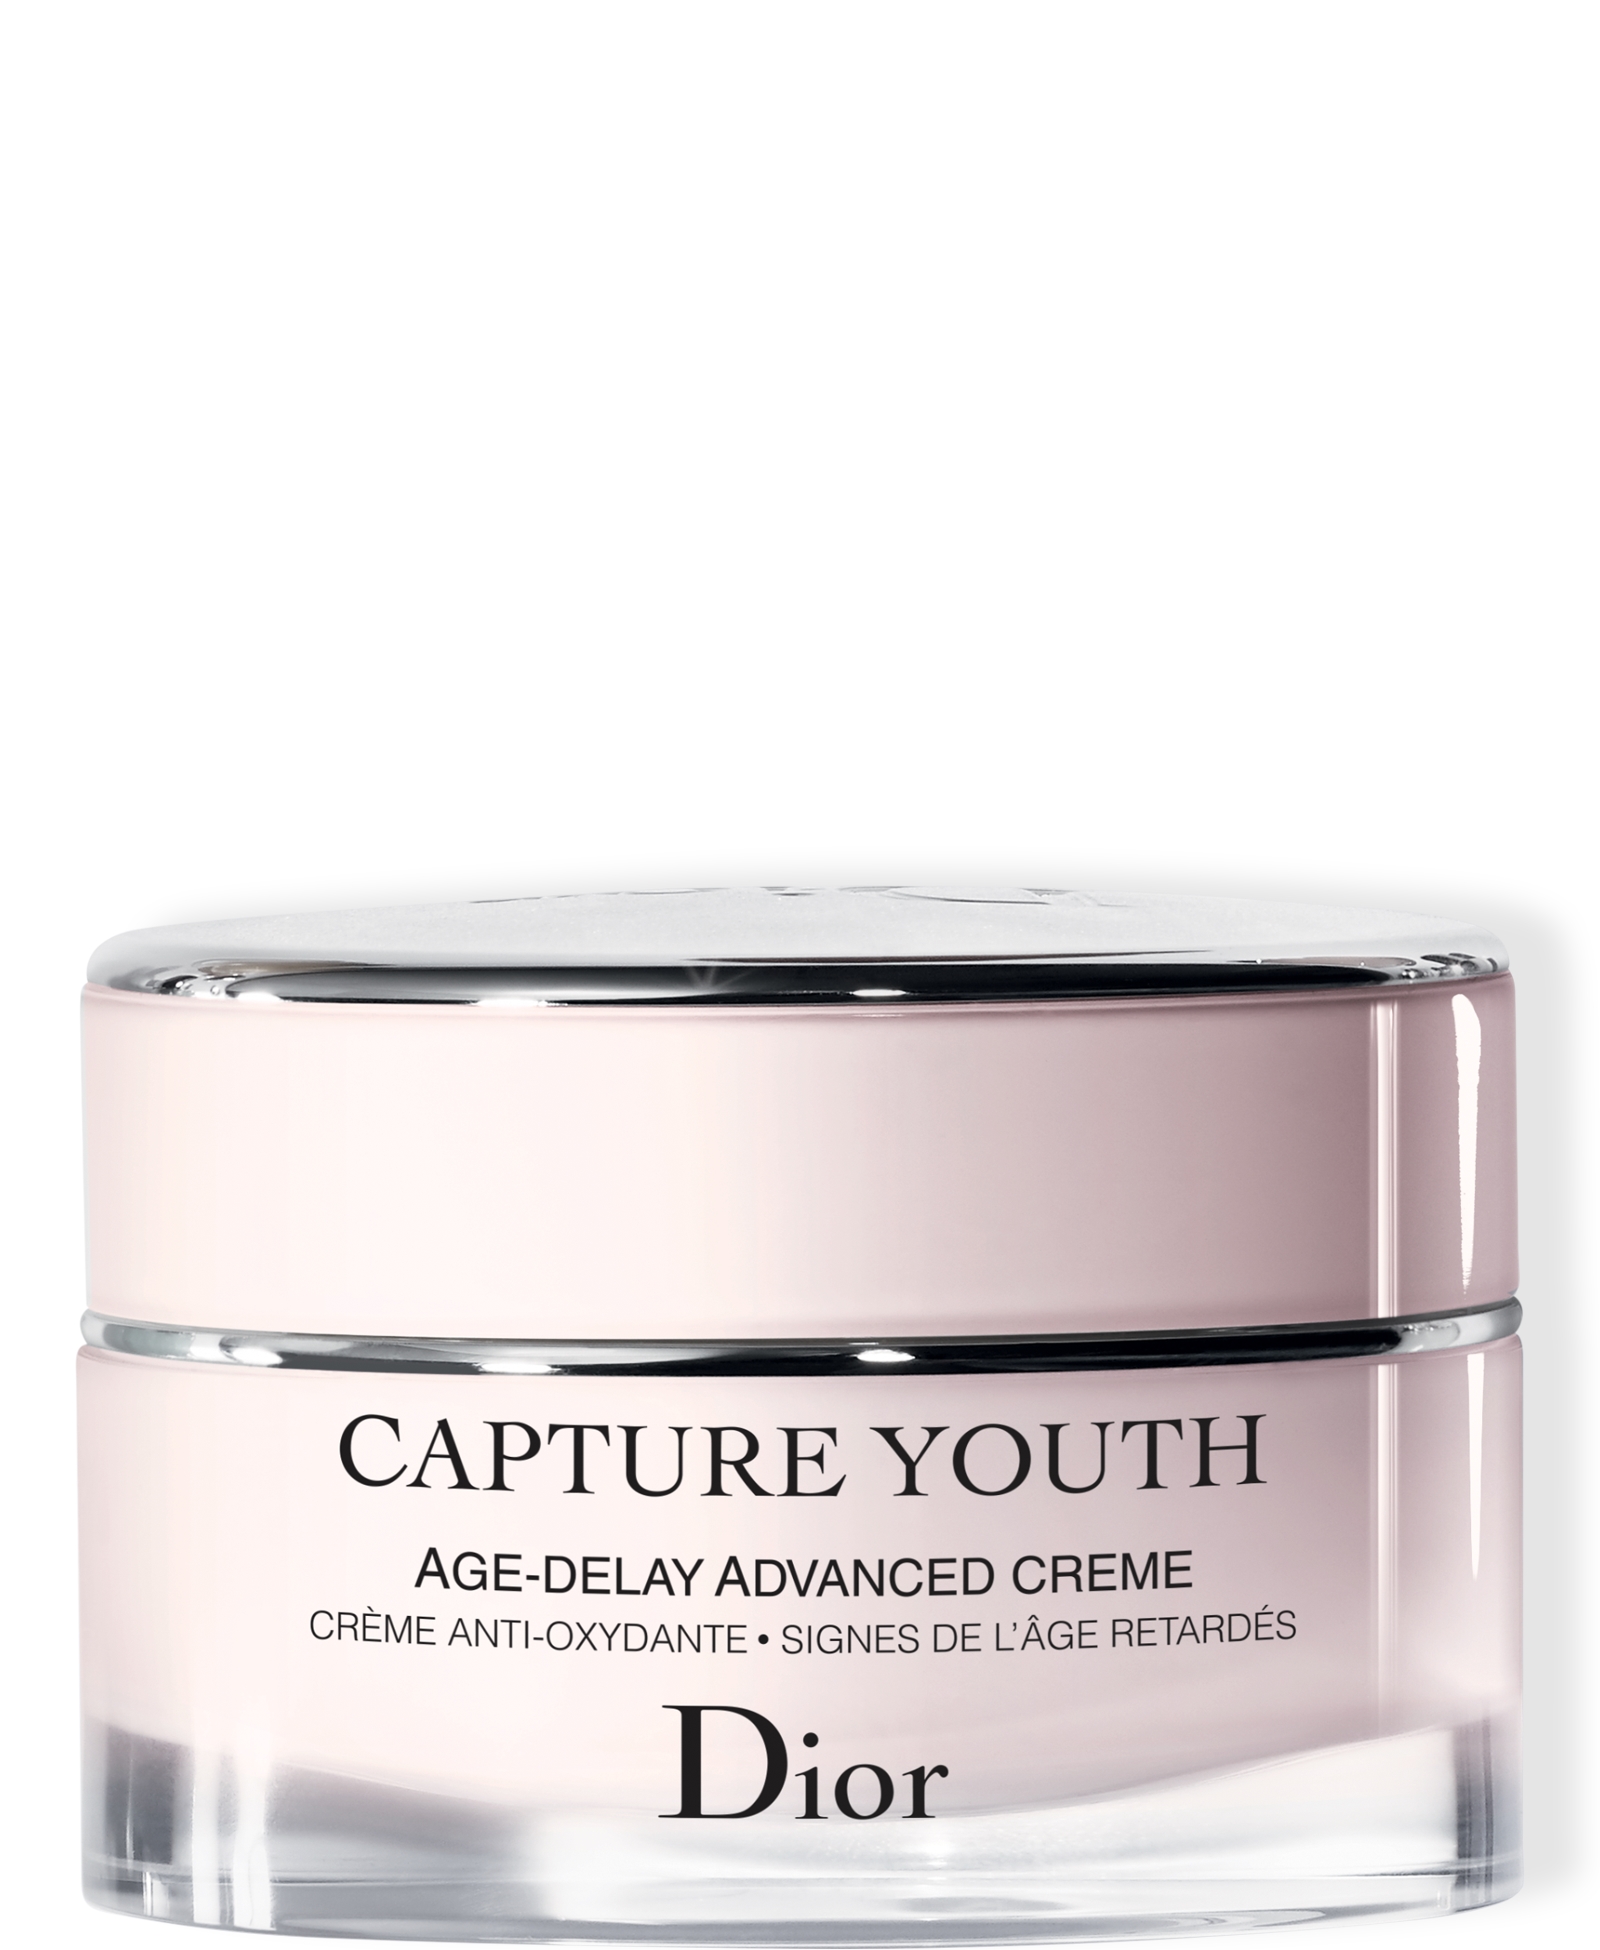  Capture Youth Age-Delay Advanced Creme